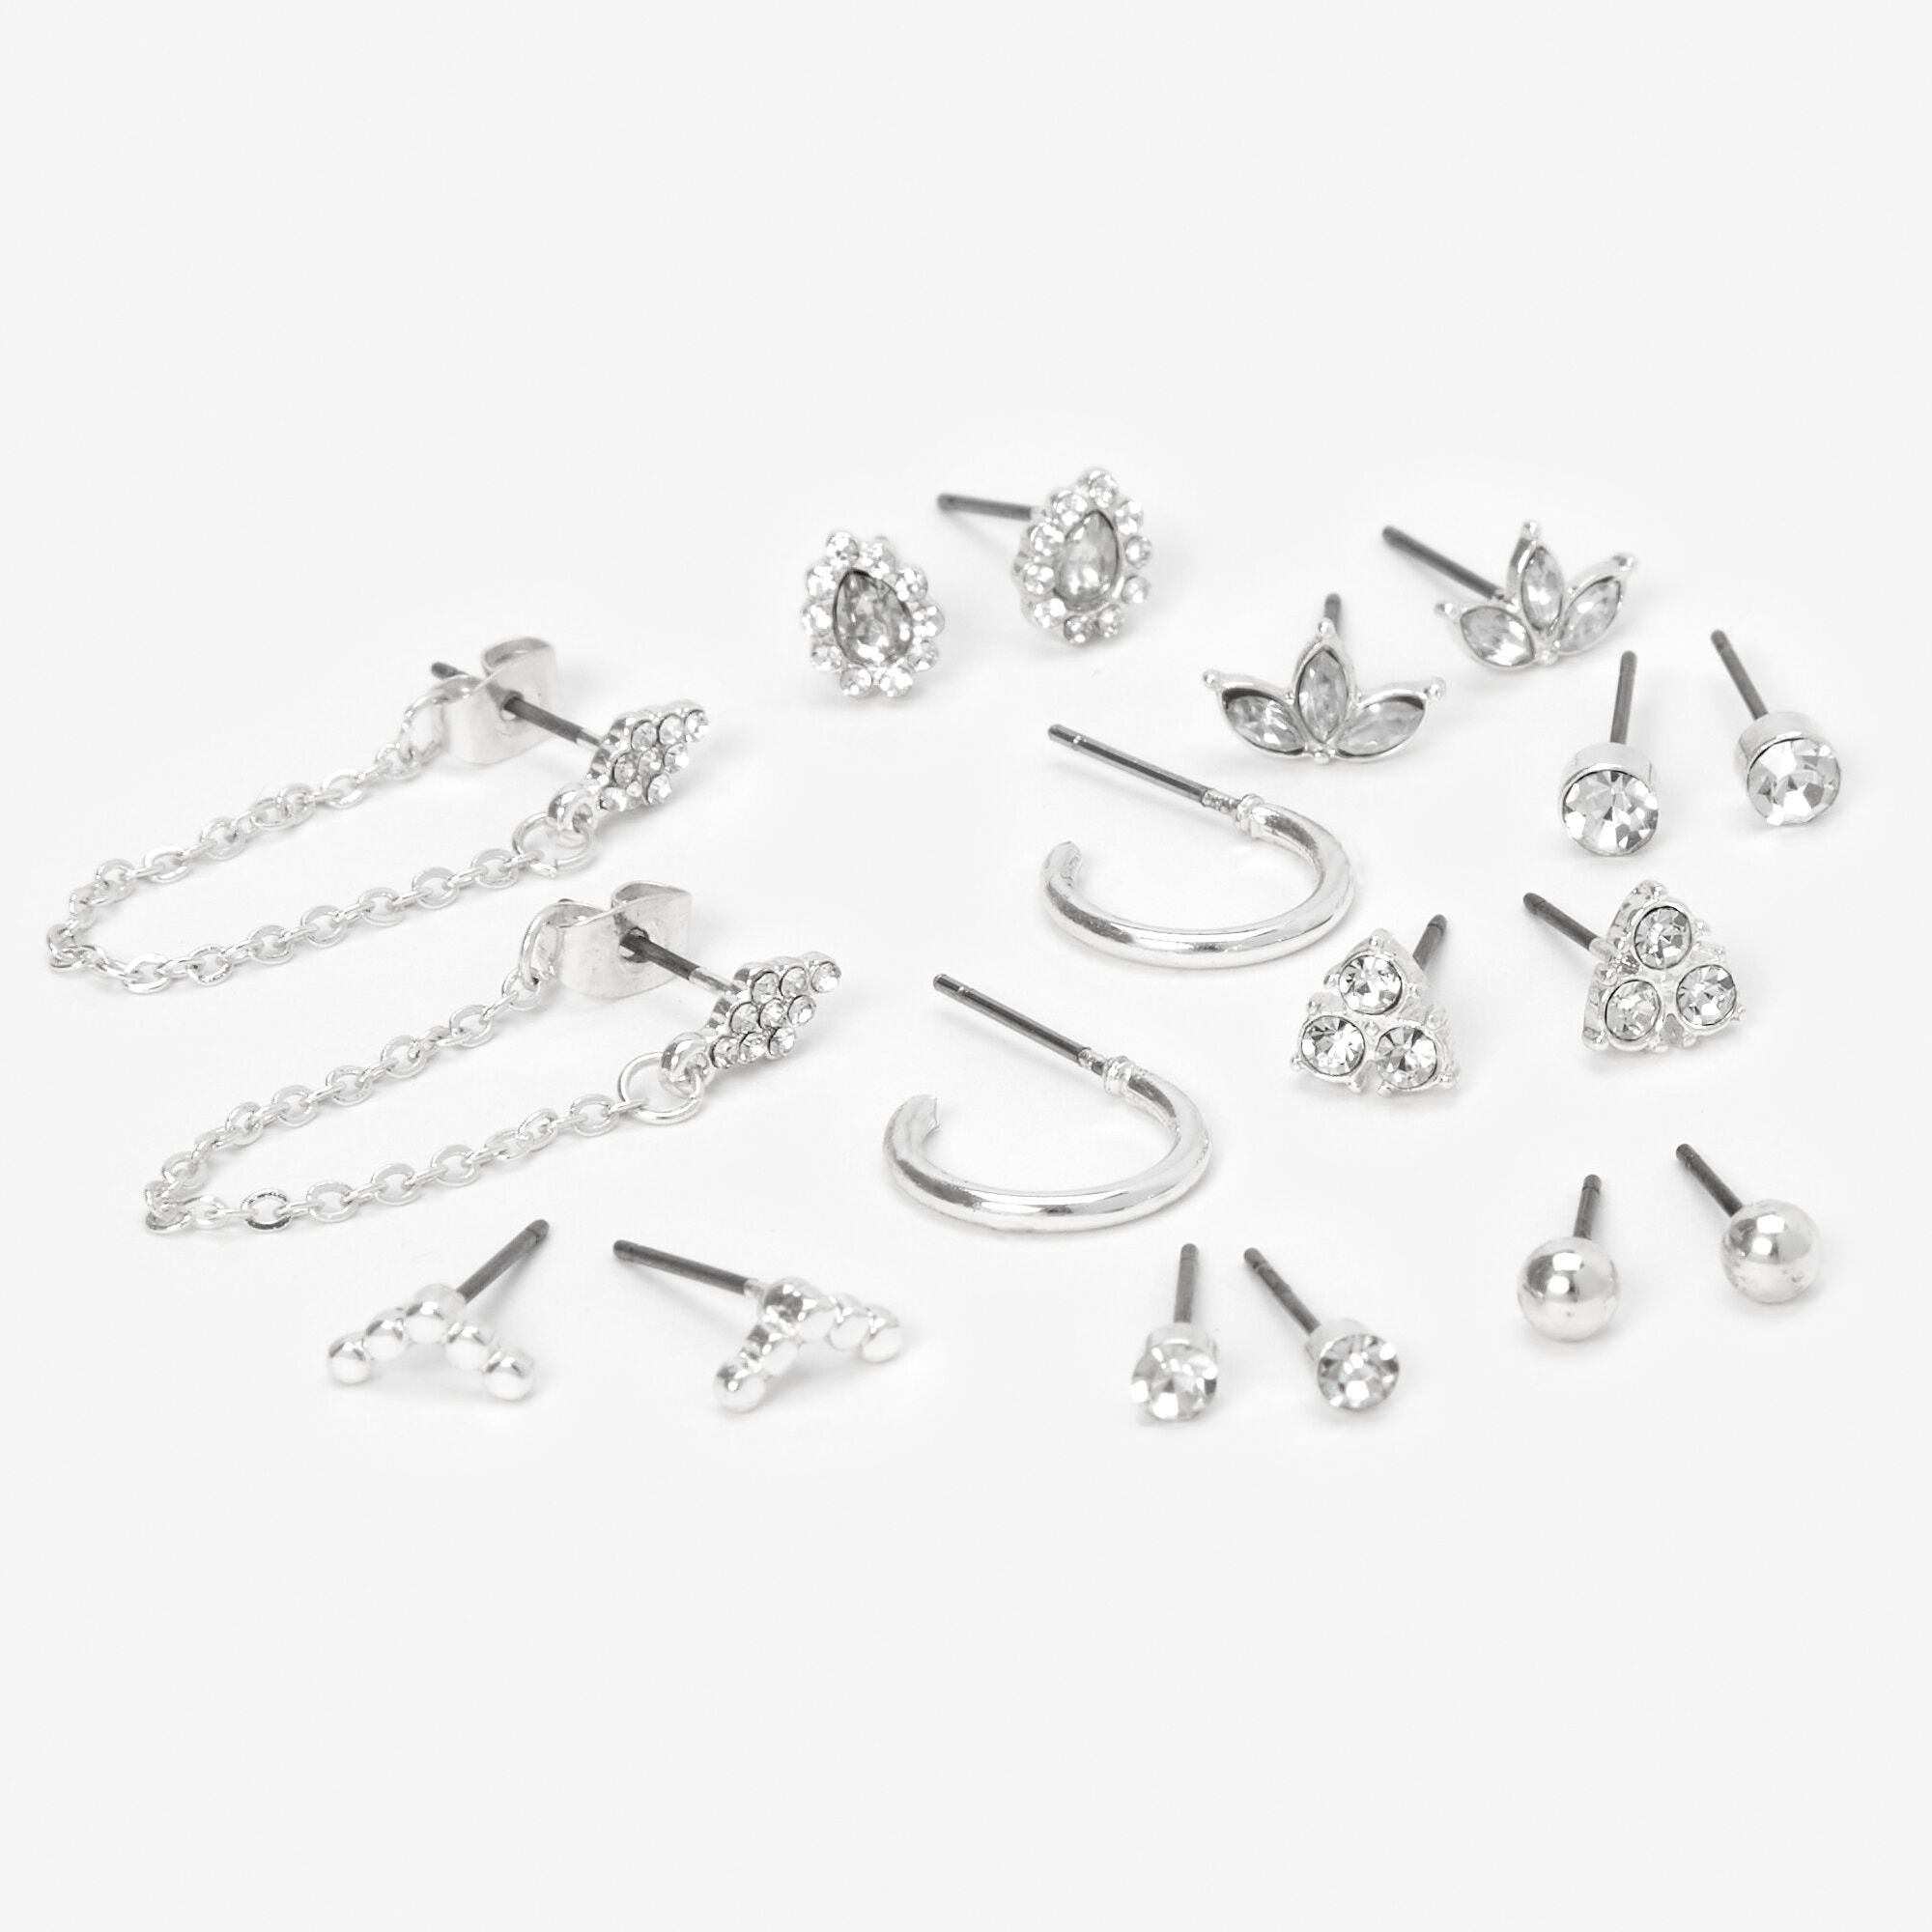 Icing Sterling Silver Earring Back Replacements - 12 Pack